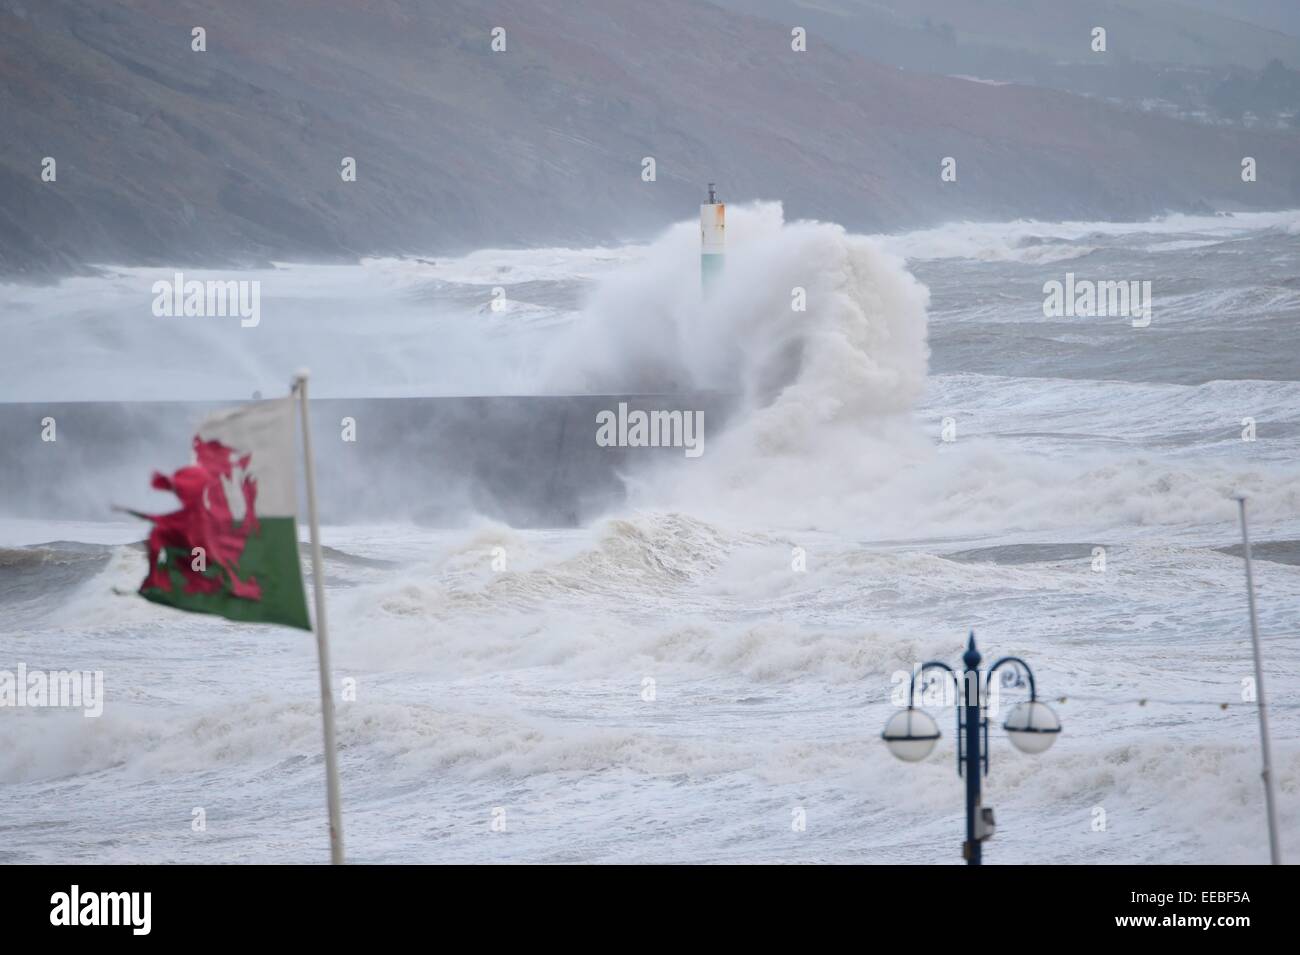 Aberystwyth, Wales, UK. 15th January, 2015. UK Weather: A battered and torn welsh flag flies as gale force winds and stormy seas continue to batter the seafront  in Aberystwyth Wales.   Flood warnings are in place for many rivers in mid and north wales.  with severe  gale force winds gusting up to 70mph in places making for "tricky travel conditions”. Stock Photo